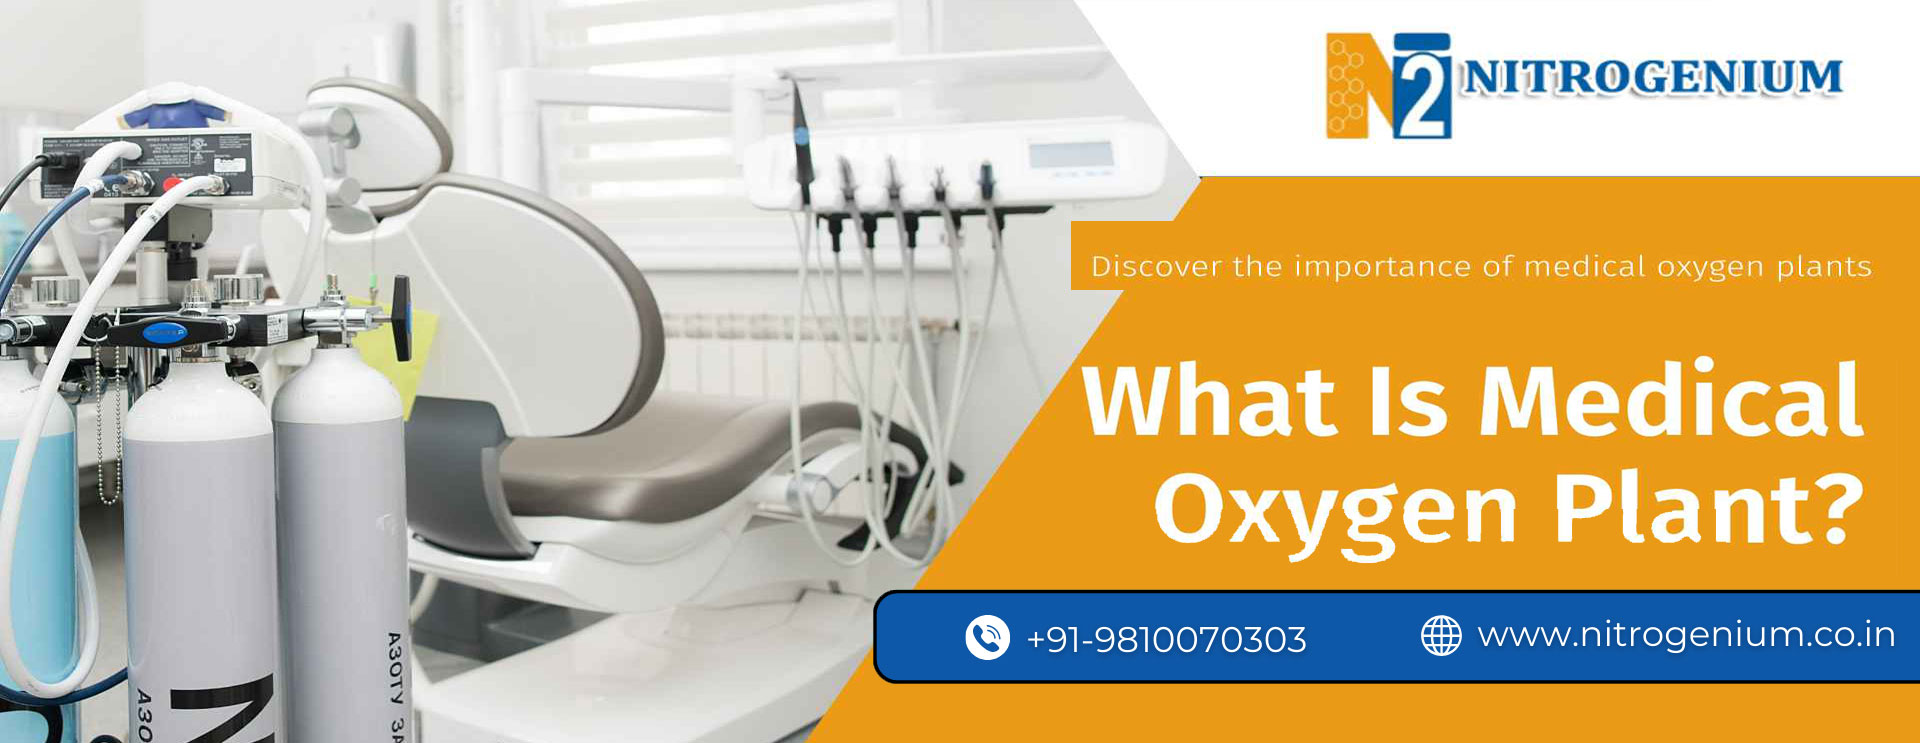 What is Medical Oxygen Plant